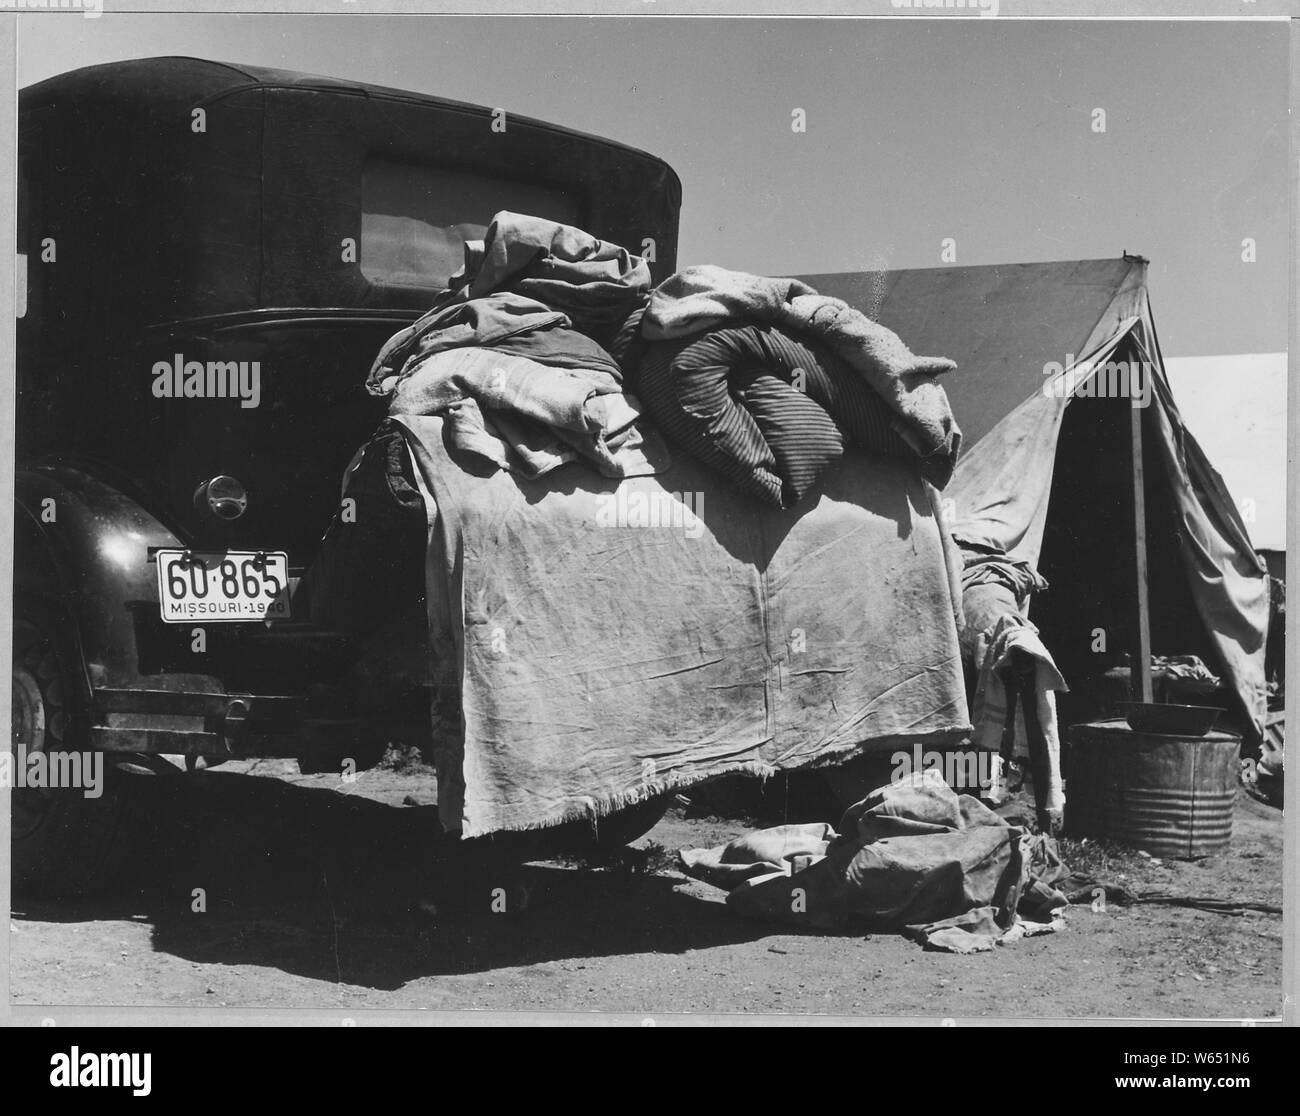 Edison, Kern County, California. Close-up of potato pickers camp. $6 per month is charged for the ri . . .; Scope and content:  Full caption reads as follows: Edison, Kern County, California. Close-up of potato pickers camp. $6 per month is charged for the right to pitch a tent on the ground. Stock Photo